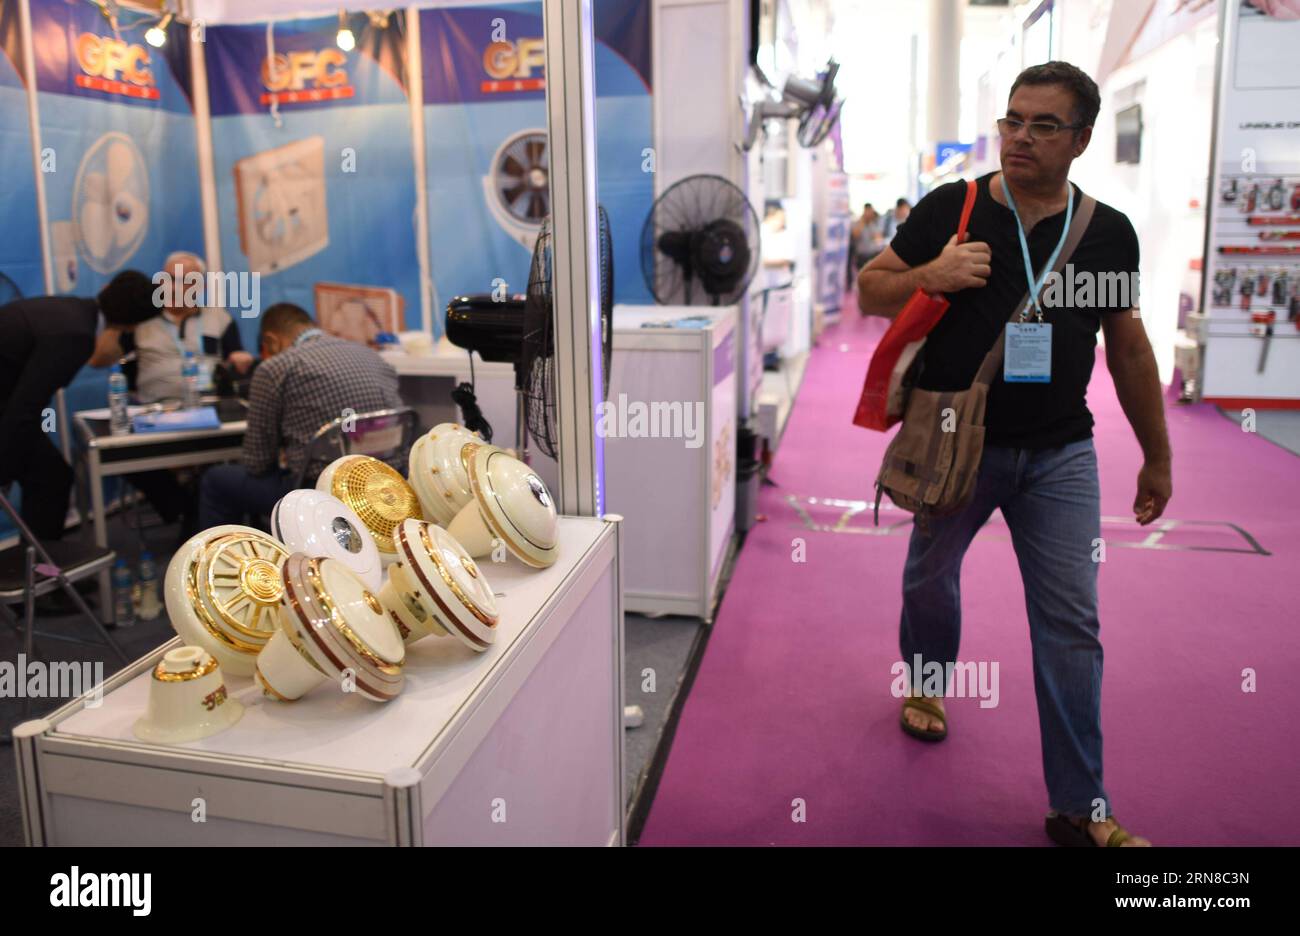 (151016) -- GUANGZHOU, Oct. 16, 2015 -- A visitor is seen at the Pakistan booth during the China Import and Export Fair, or the Canton Fair, in Guangzhou, capital of south China s Guangdong Province, Oct. 16, 2015. A total of 353 enterprises from countries and regions along the Belt and Road participated the current Canton Fair held in Guangzhou, which took nearly 60 percent of all exhibitors. The Belt and Road initiative, standing for the Silk Road Economic Belt and the 21st Century Maritime Silk Road, was unveiled by Chinese President Xi Jinping in 2013. It brings together countries in Asia, Stock Photo